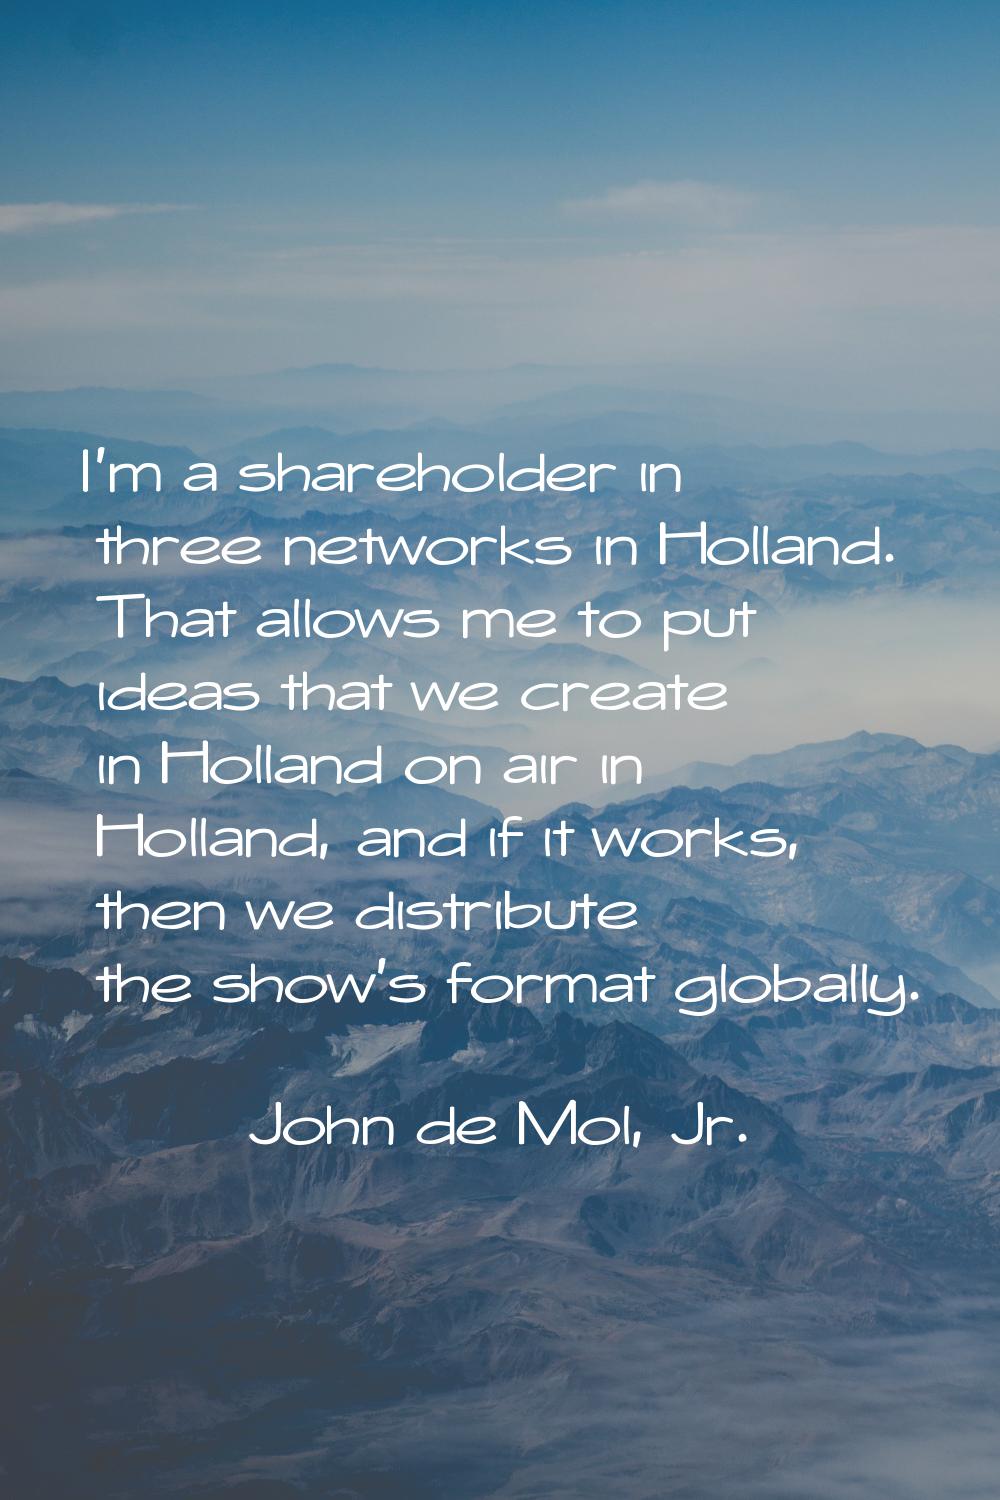 I'm a shareholder in three networks in Holland. That allows me to put ideas that we create in Holla